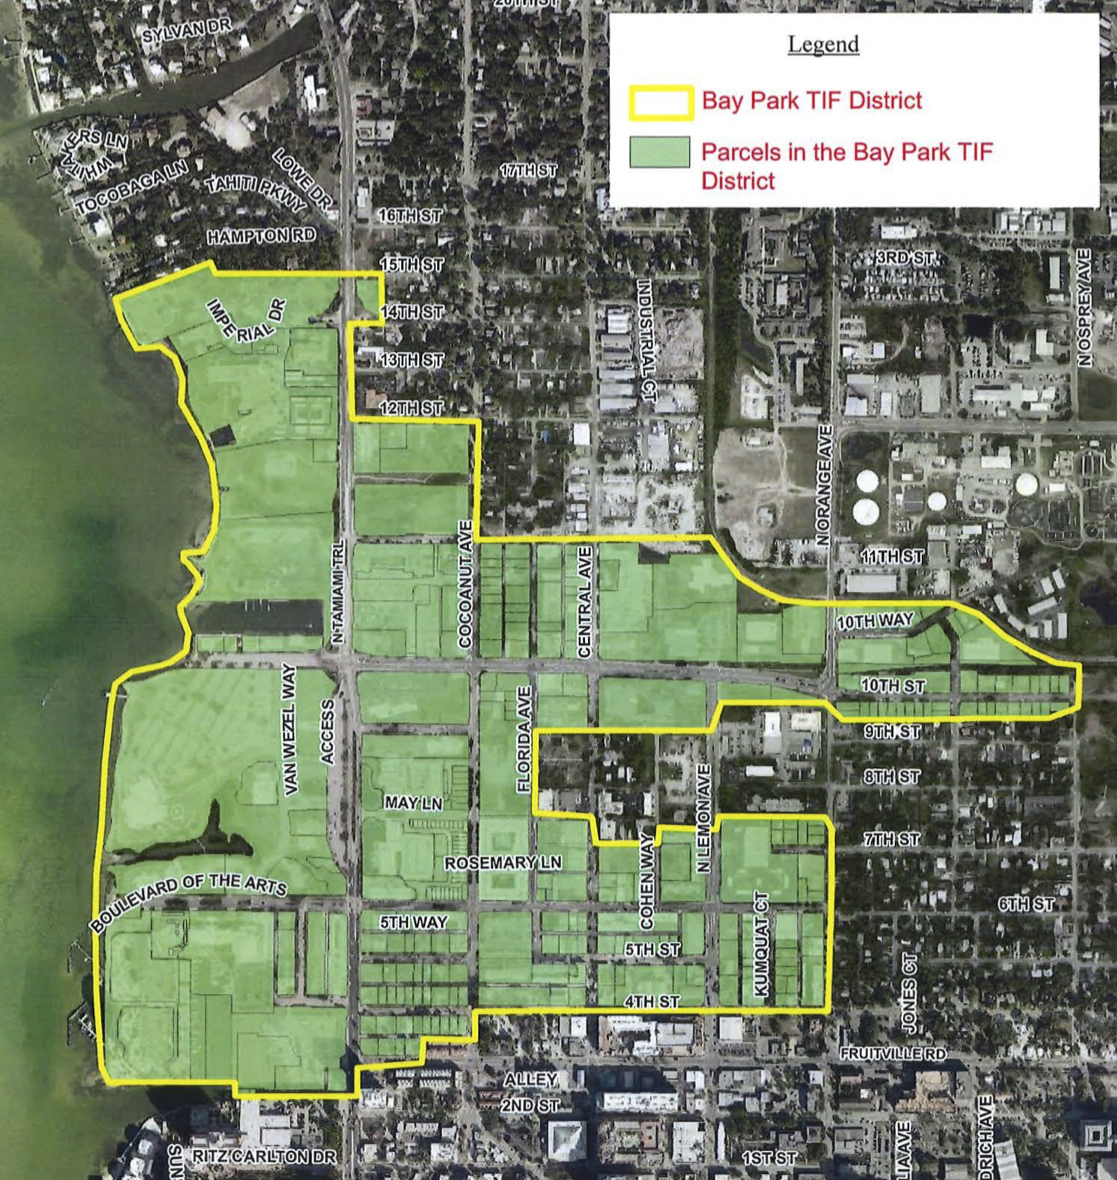 Boundaries of the proposed tax increment financing district. Image via city of Sarasota.